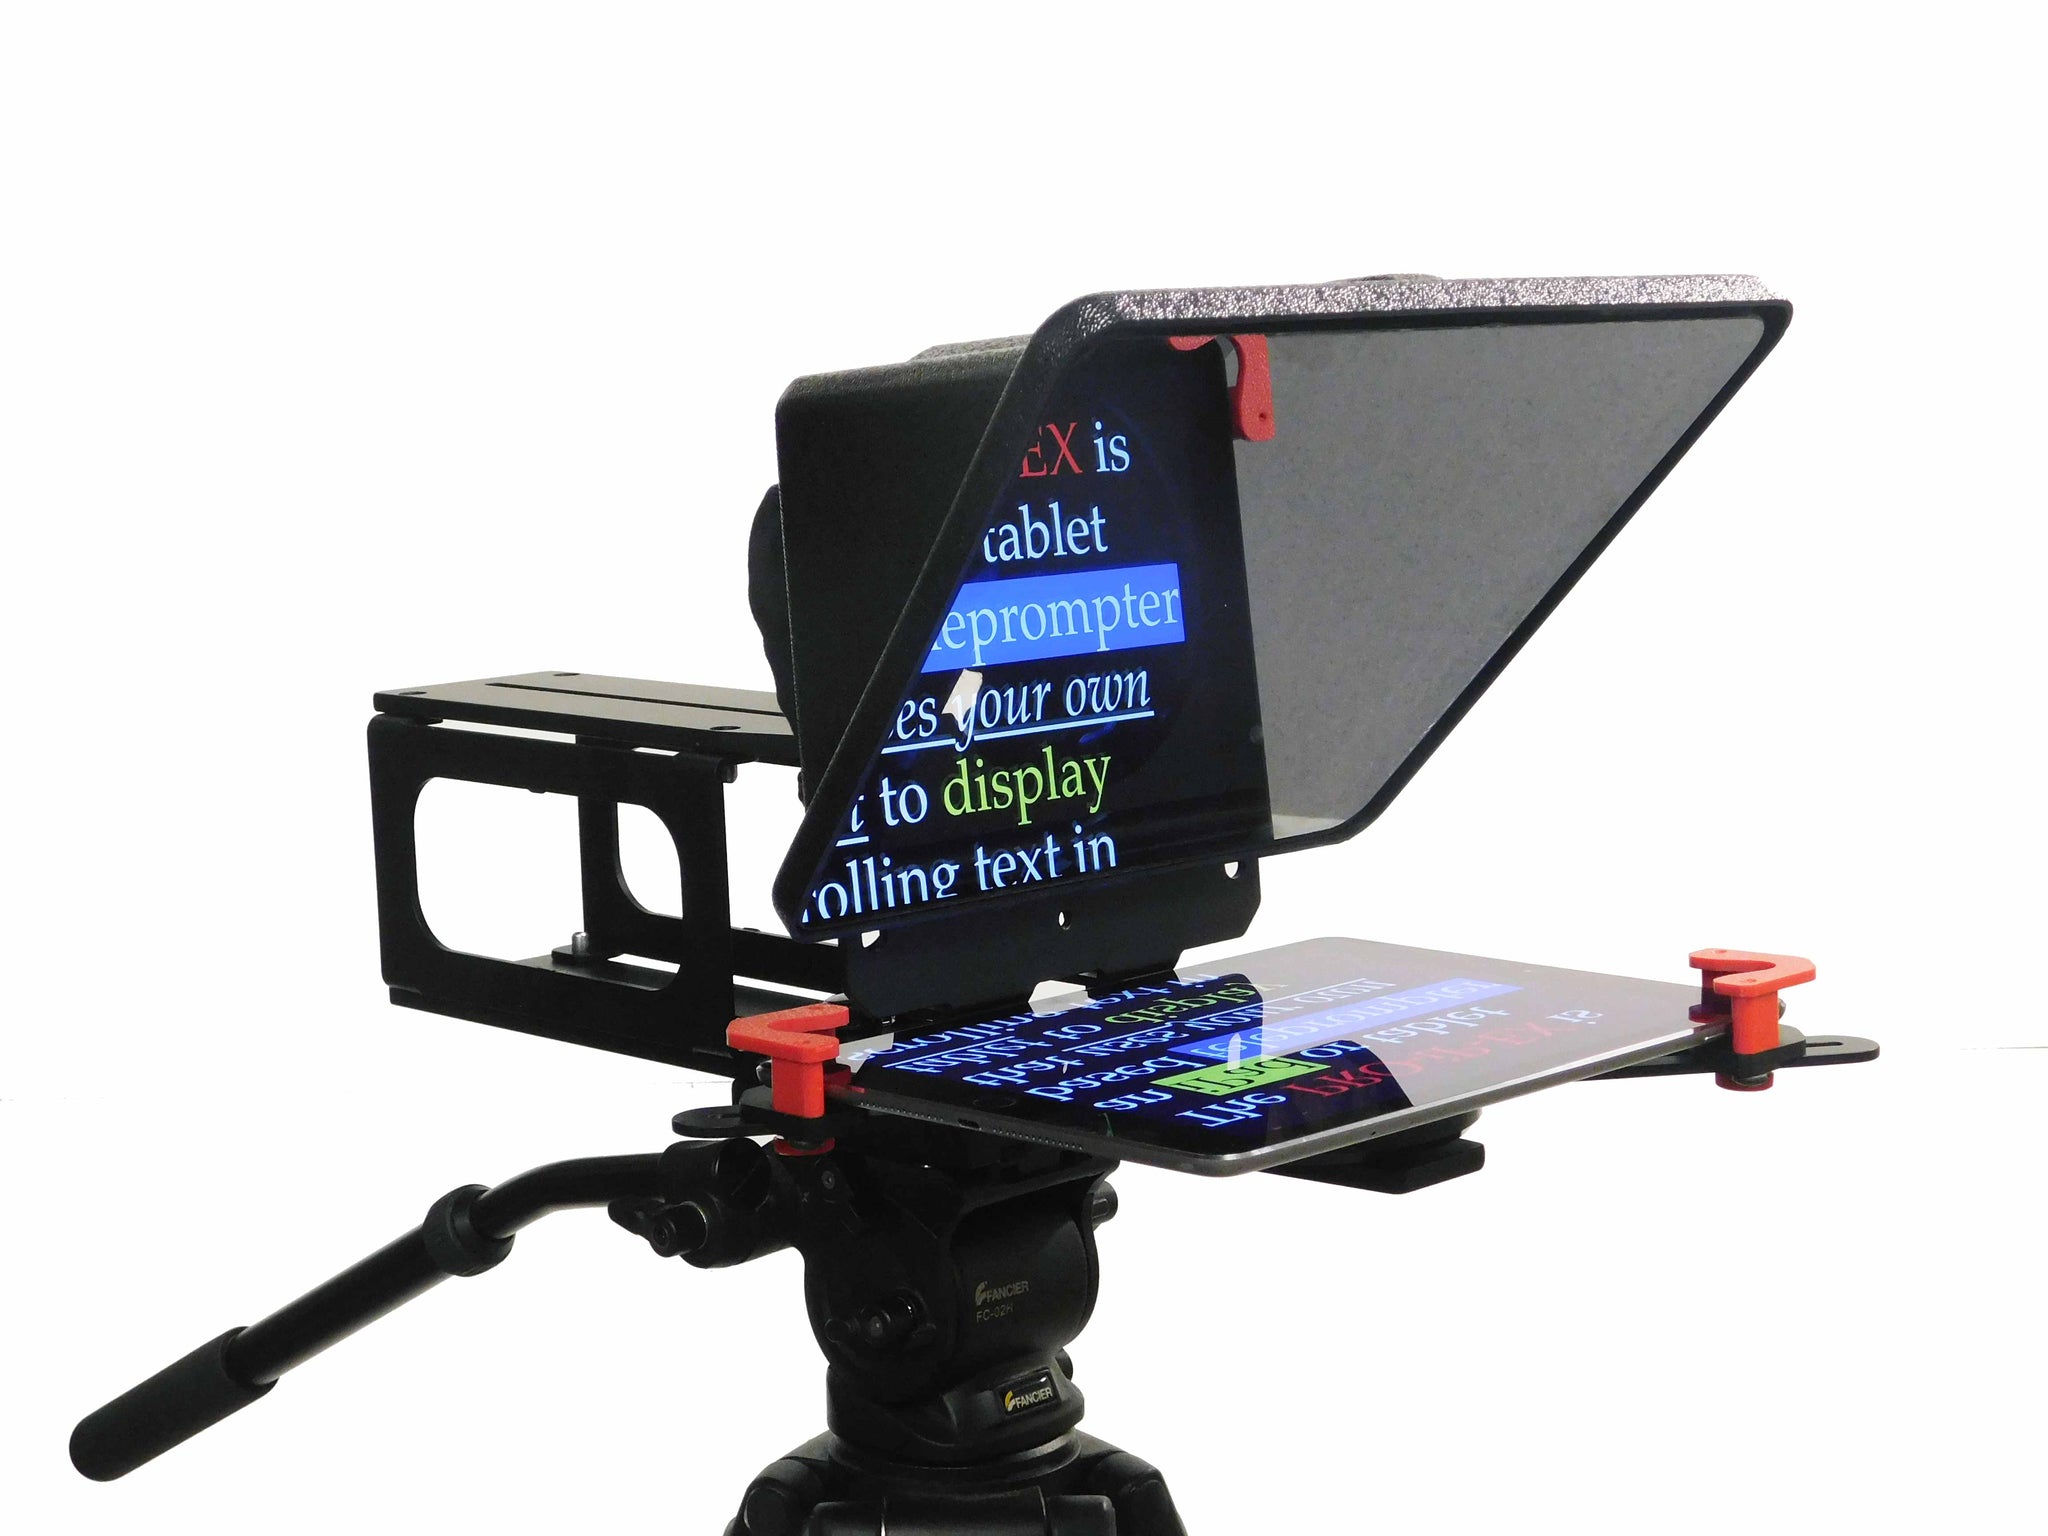 portable teleprompter software